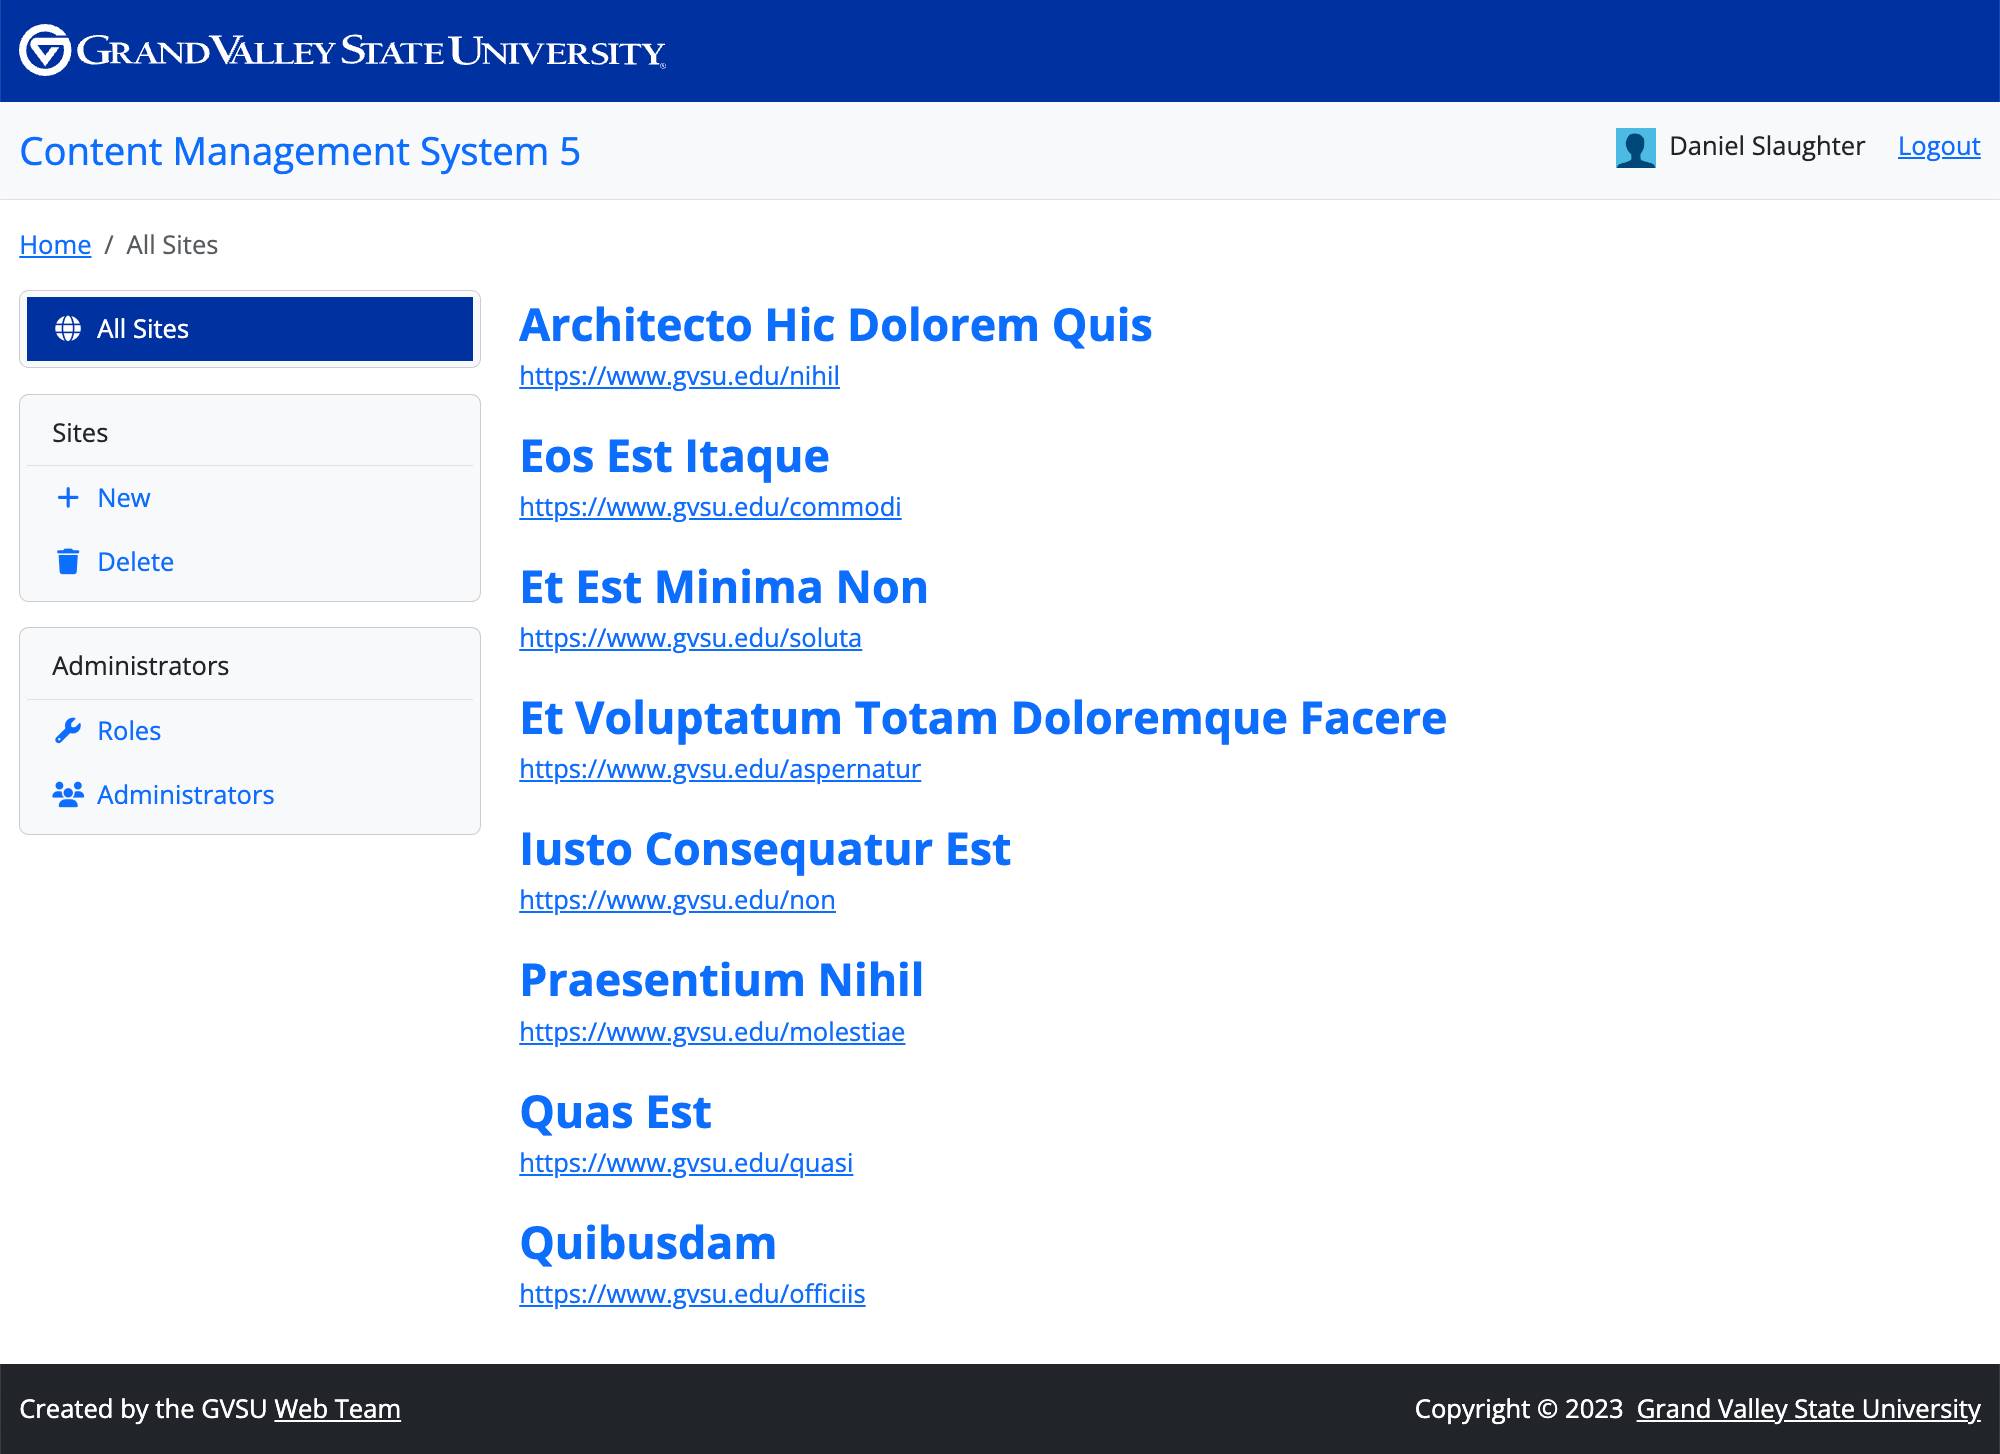 A screenshot of home screen in the CMS 5.